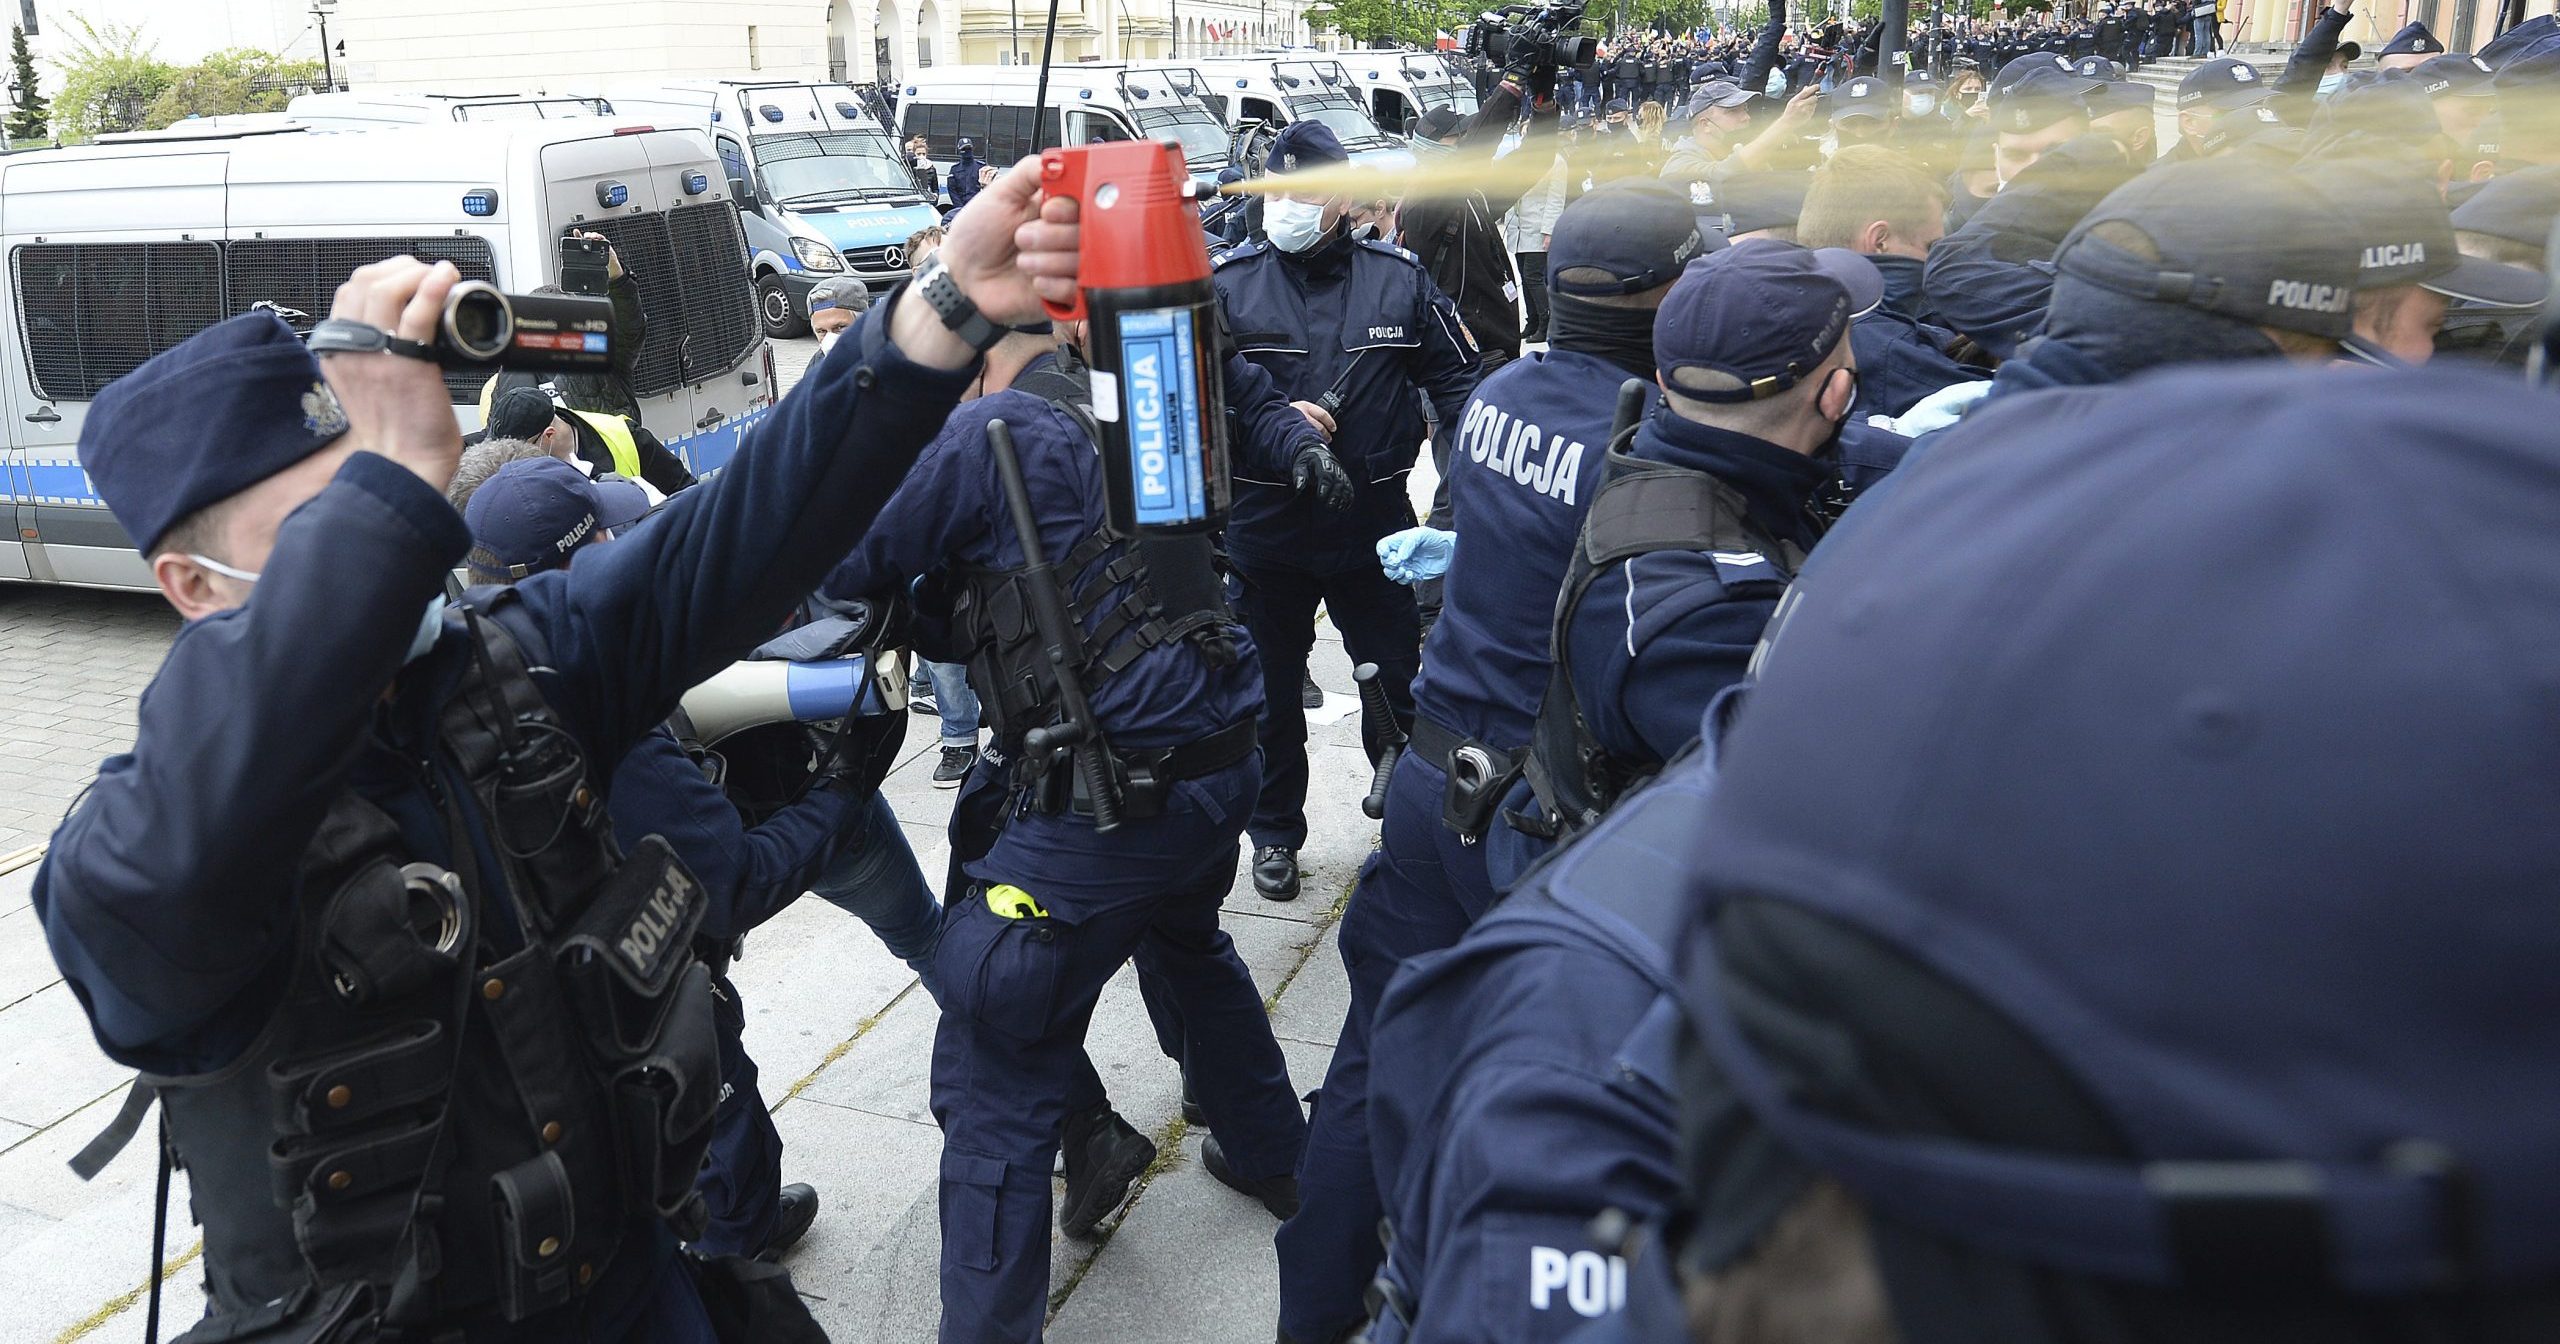 Police fire tear gas toward protesters demanding an end to economic restrictions during the coronavirus pandemic in Warsaw, Poland, on May 16, 2020.